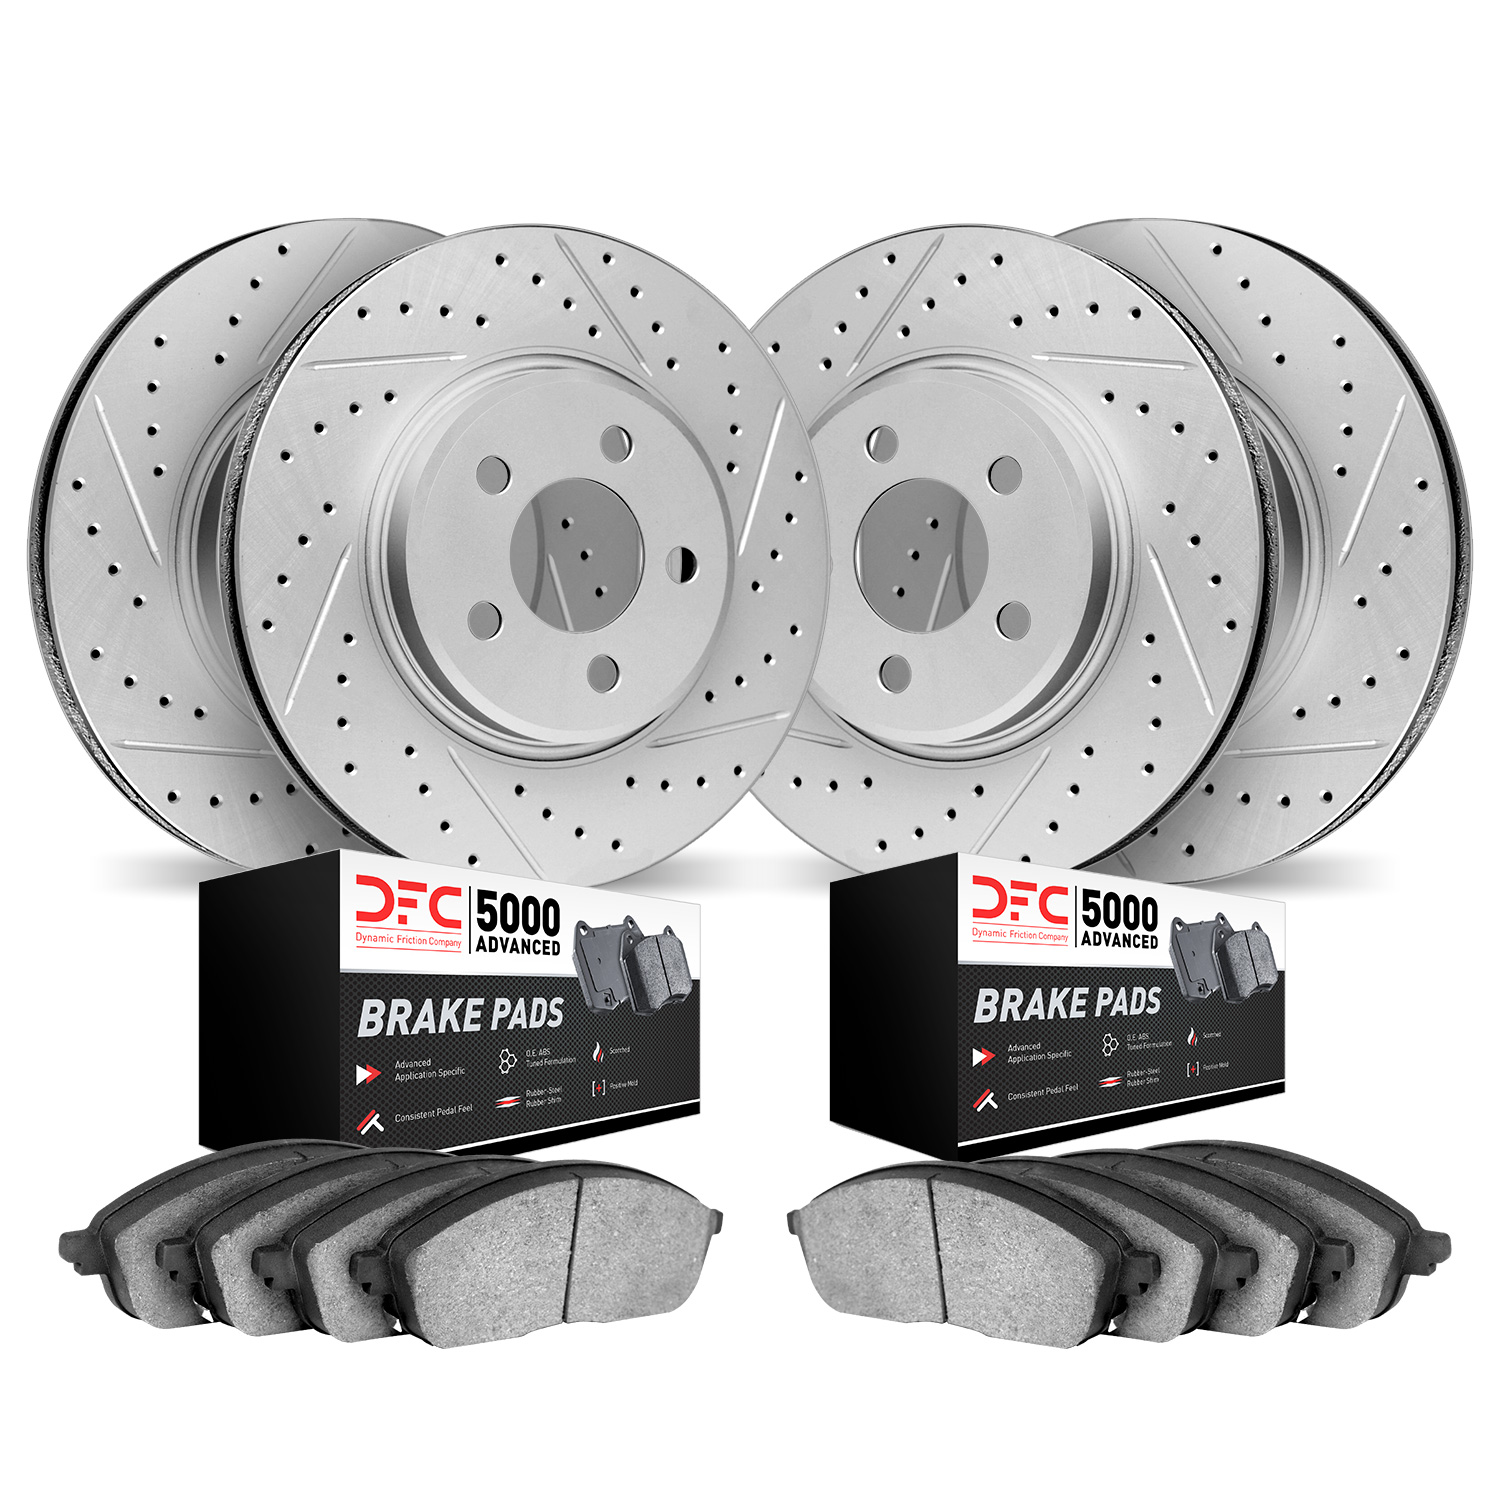 2504-46012 Geoperformance Drilled/Slotted Rotors w/5000 Advanced Brake Pads Kit, 2005-2008 GM, Position: Front and Rear